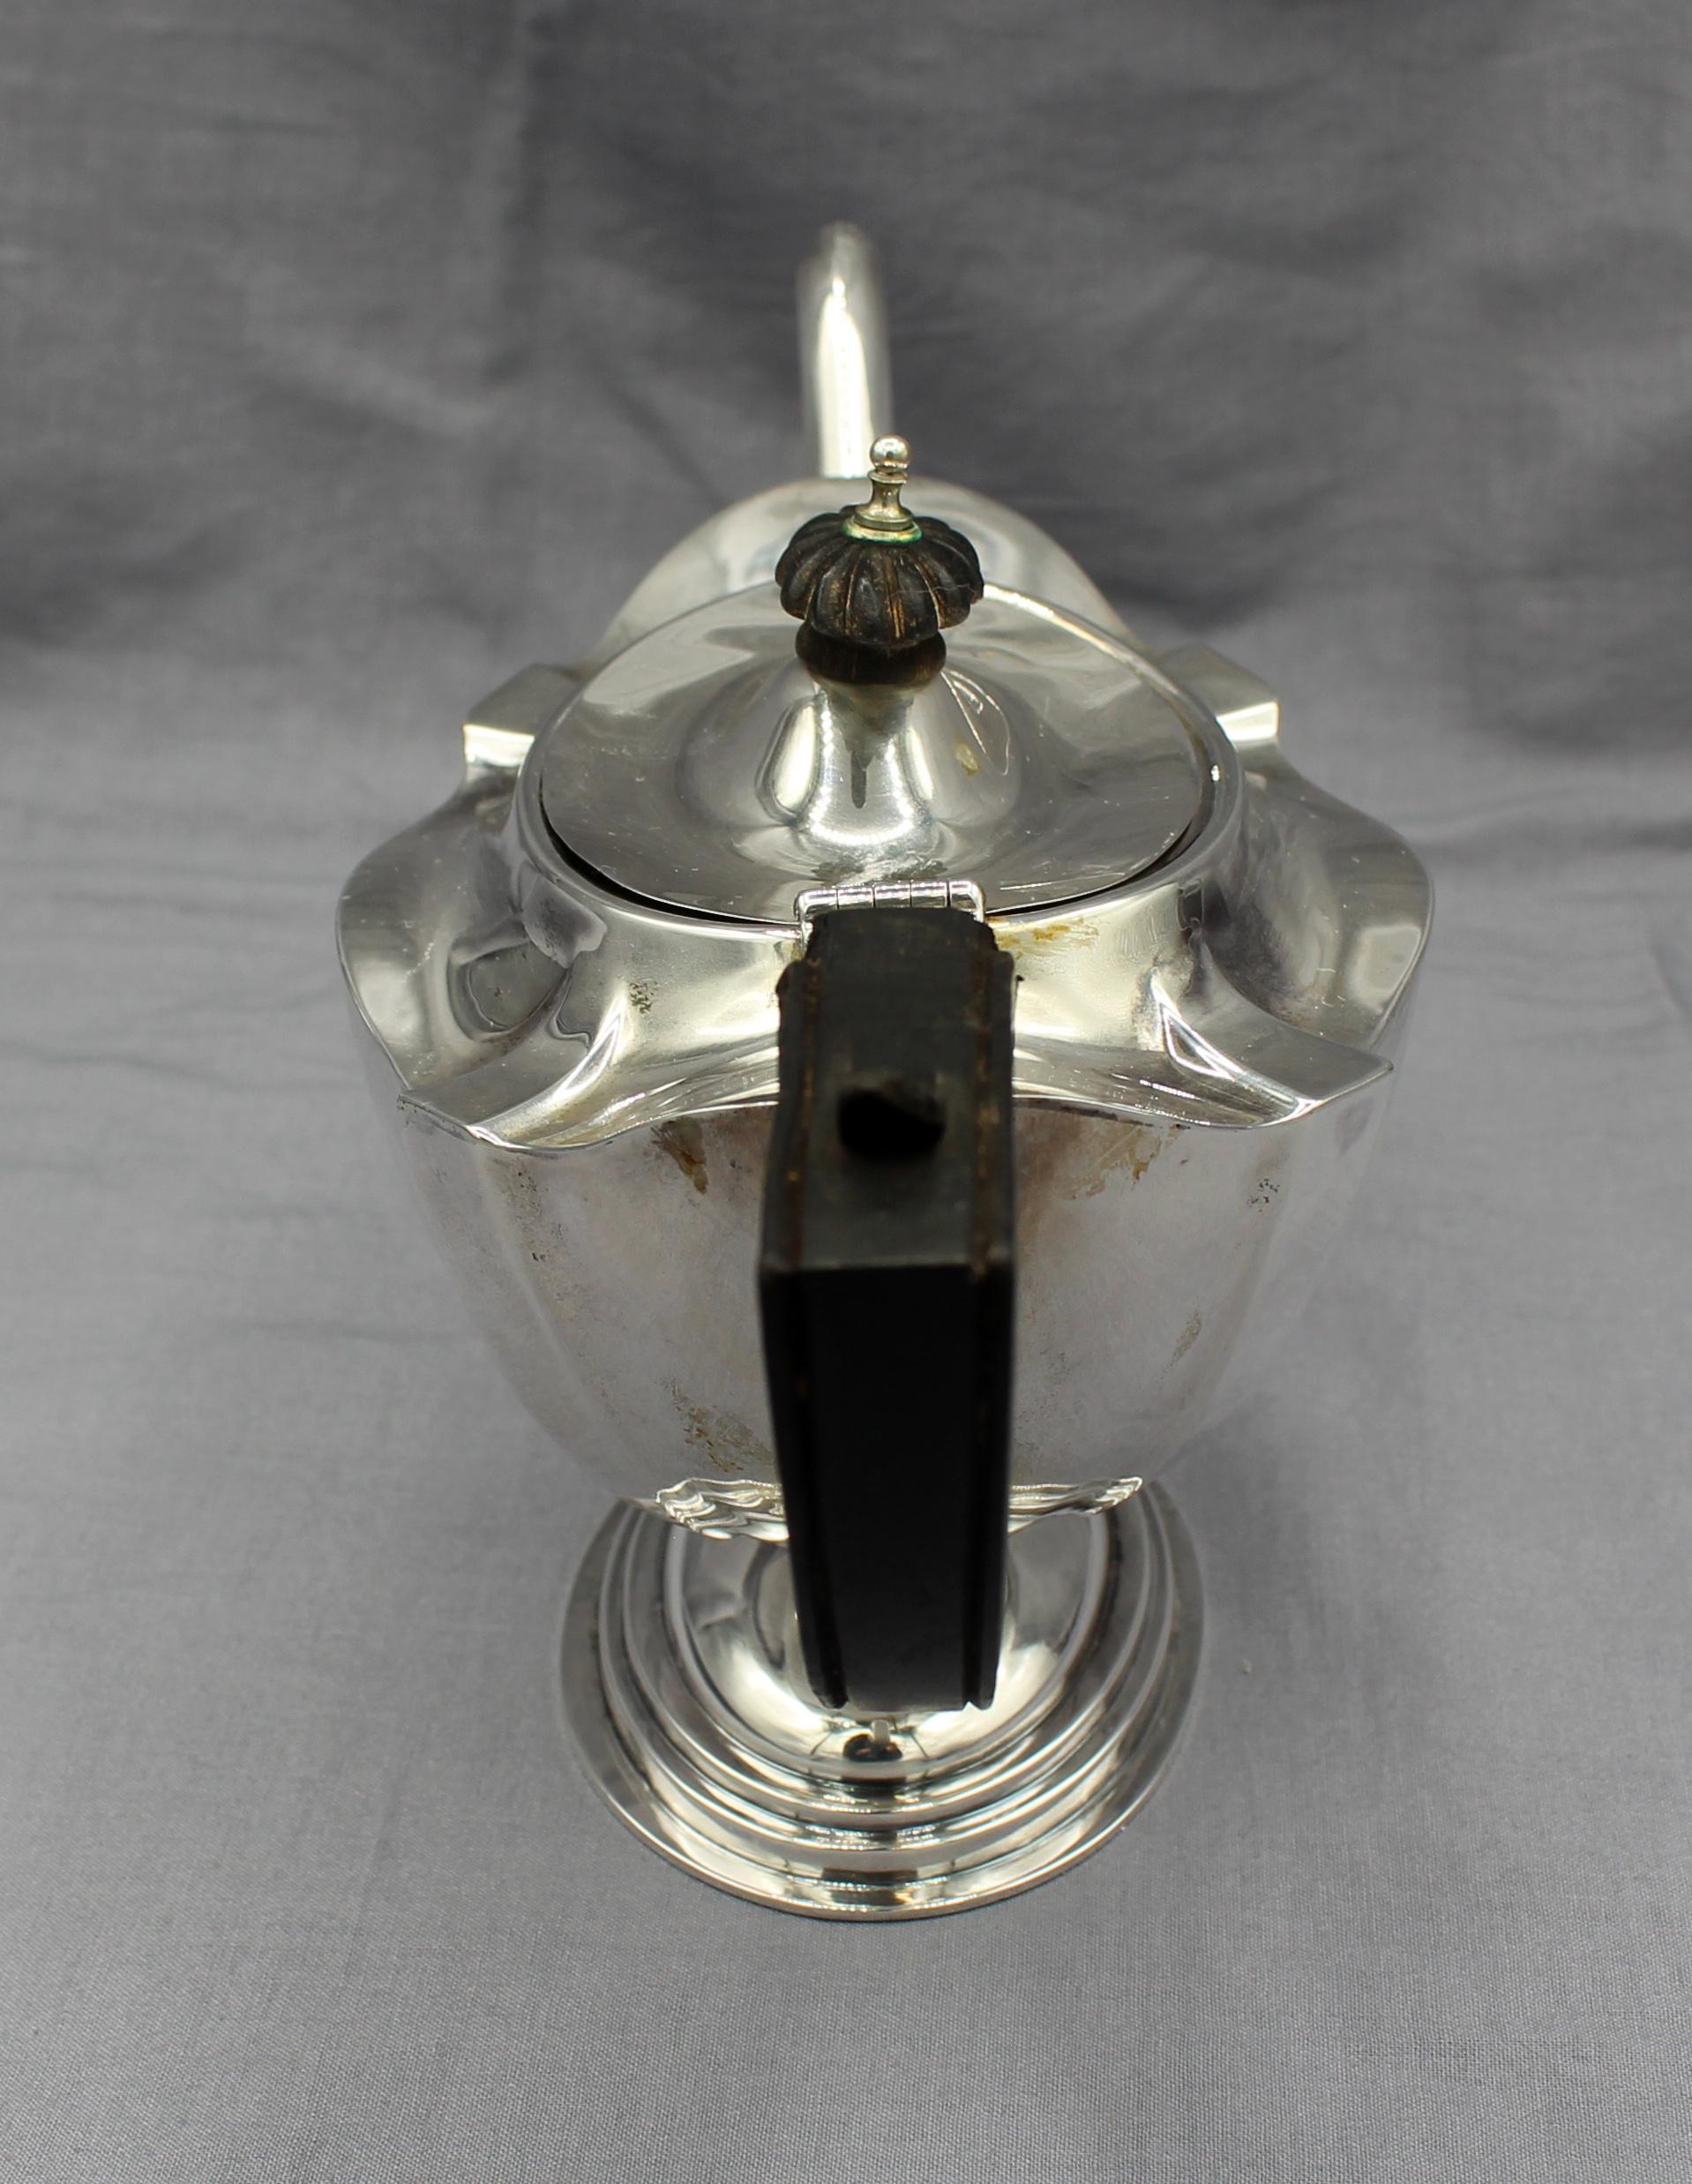 English neoclassical revival sterling tea pot, Birmingham, 1912. Likely by Albert Sydenham. Wooden oval floret knop. Base ring repair, original wooden handle as is. 9.75 troy oz. with fittings.
10.5